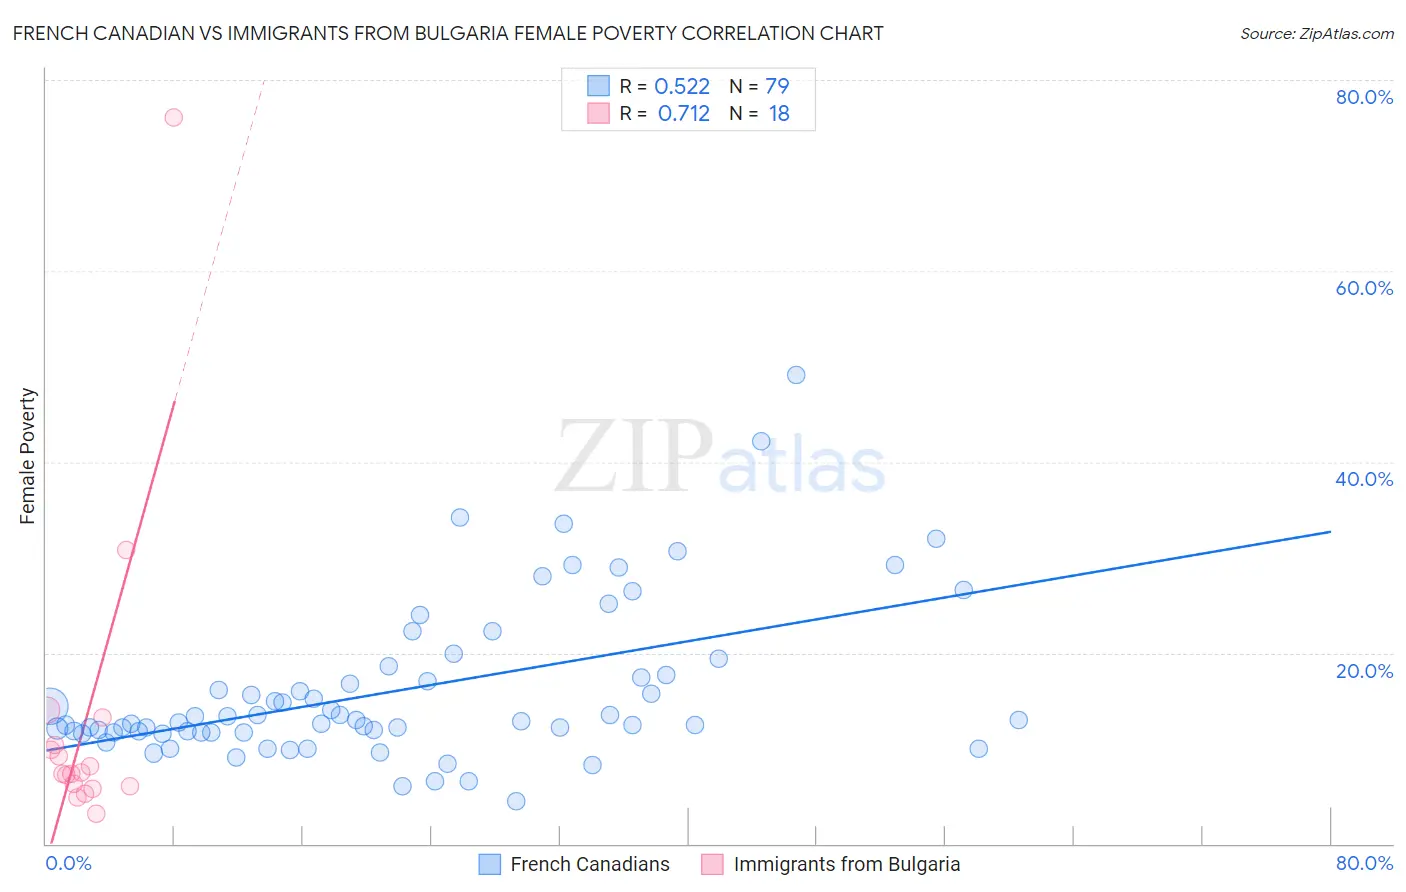 French Canadian vs Immigrants from Bulgaria Female Poverty